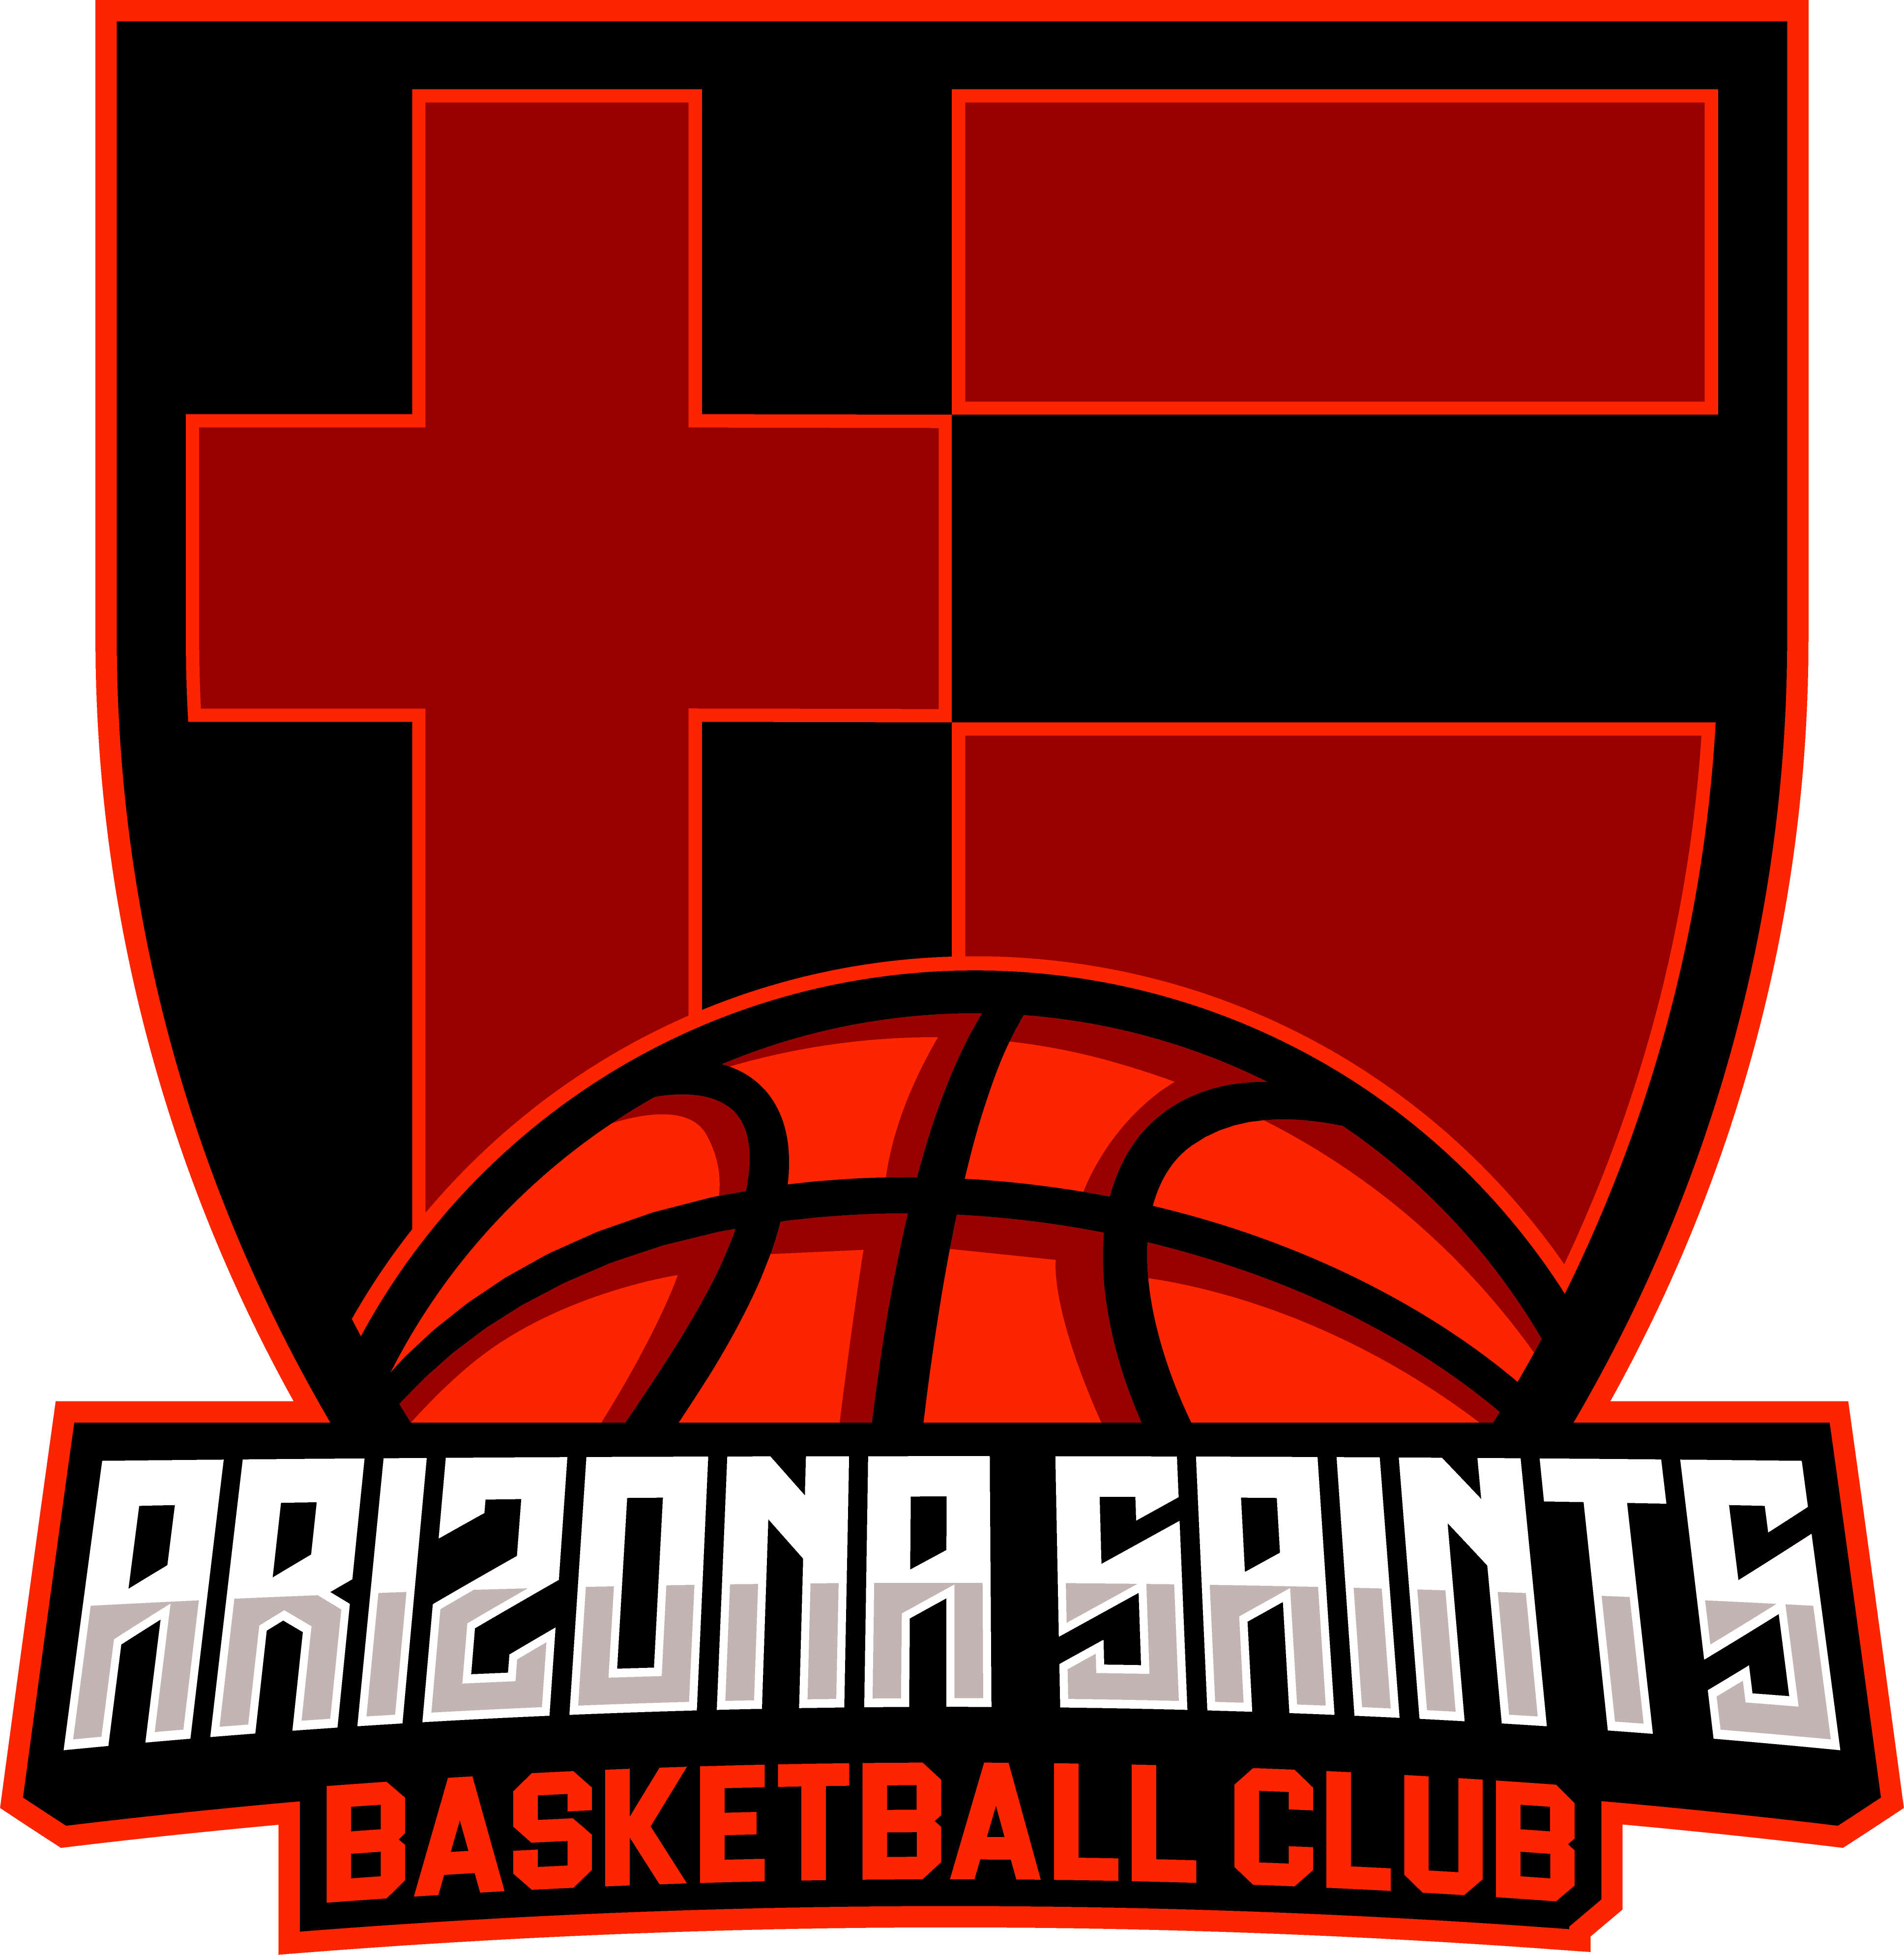 ARIZONA SAINTS ADDED TO ABA'S PACIFIC SOUTH DIVISION